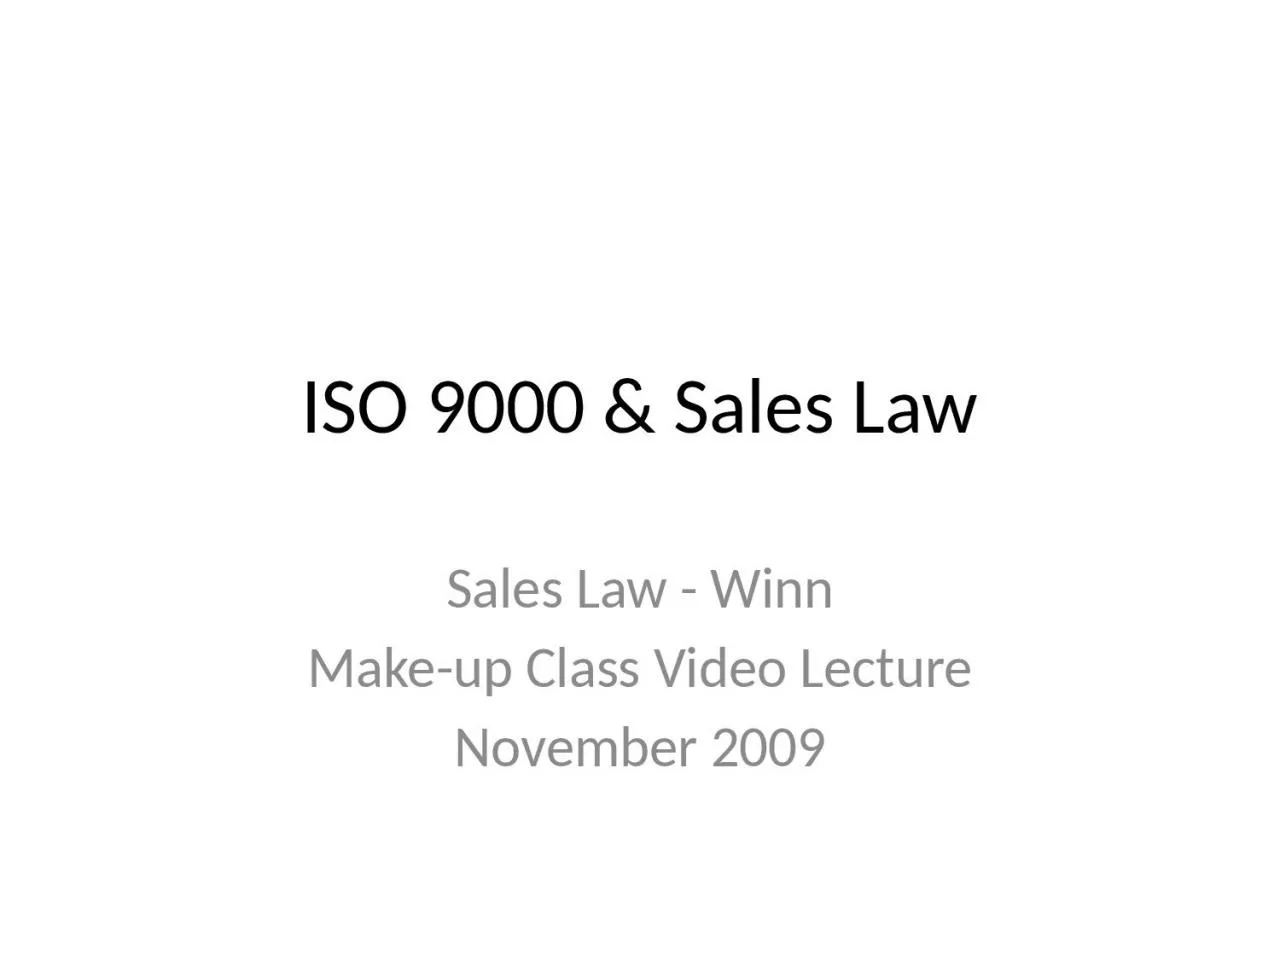 ISO 9000 & Sales Law